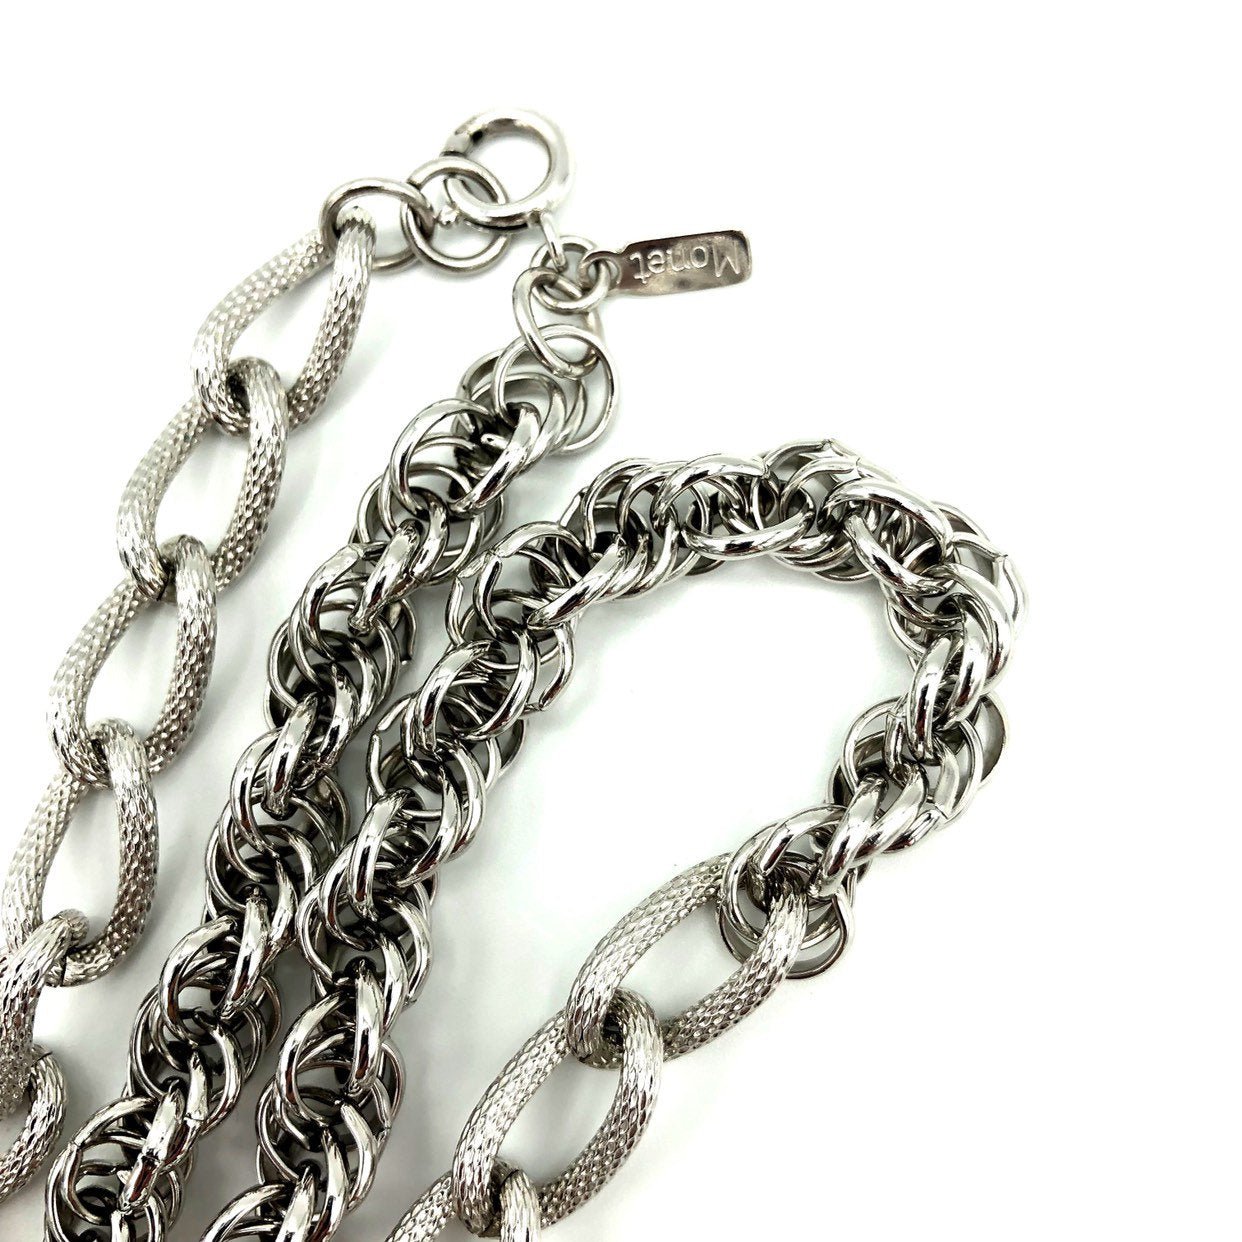 Silver Monet Layered Long Multi-Strand Chain Vintage Necklace – 24 